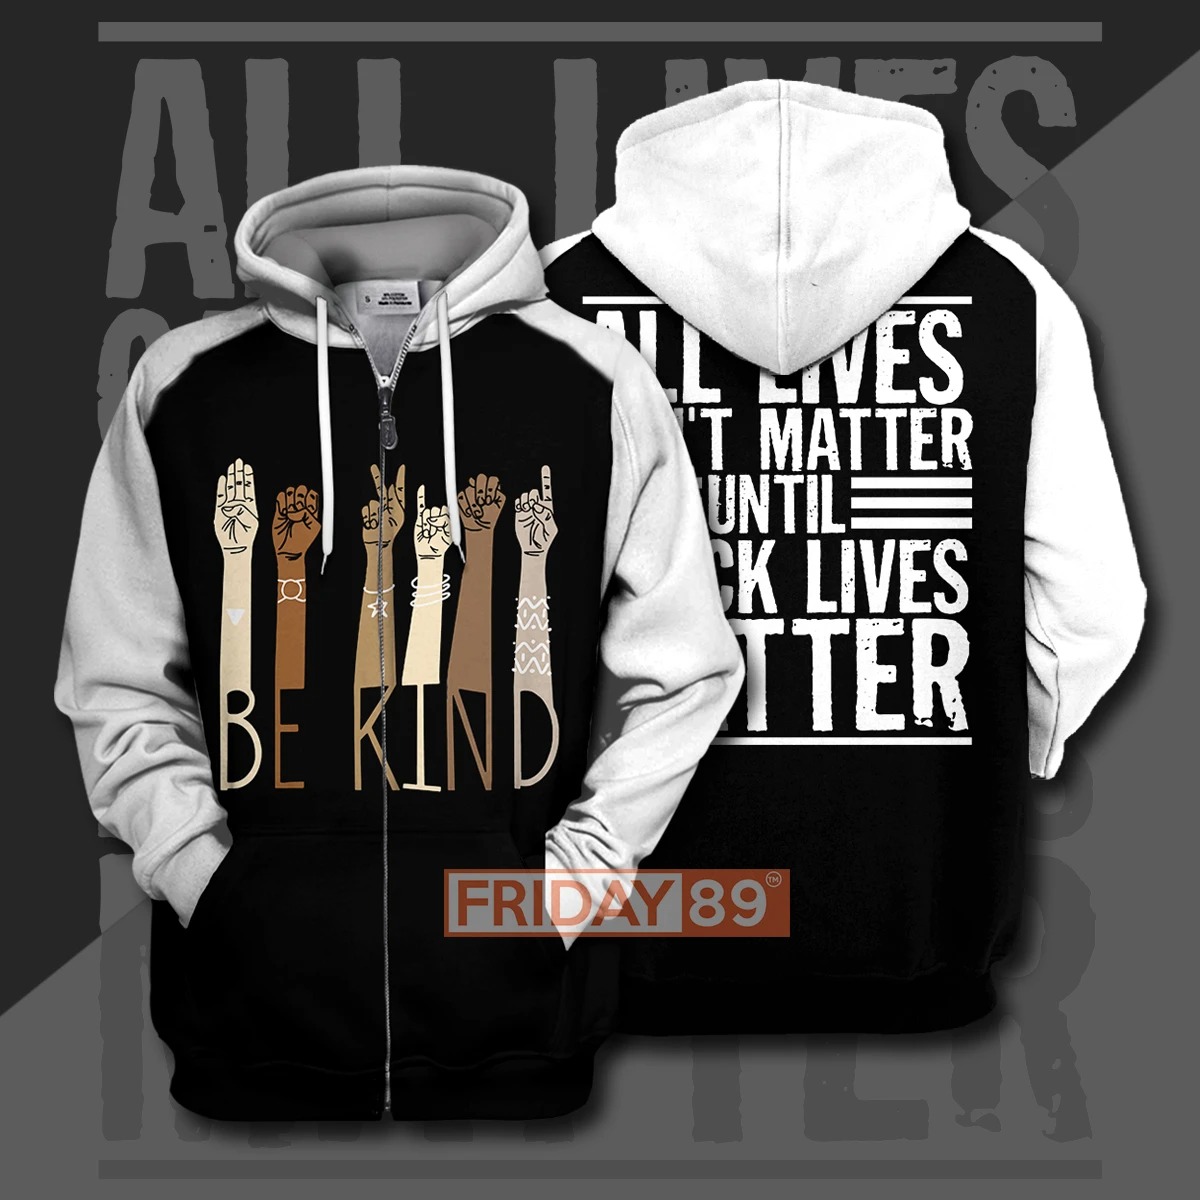 Be kind all lives cant matter until 3d print hoodie 4